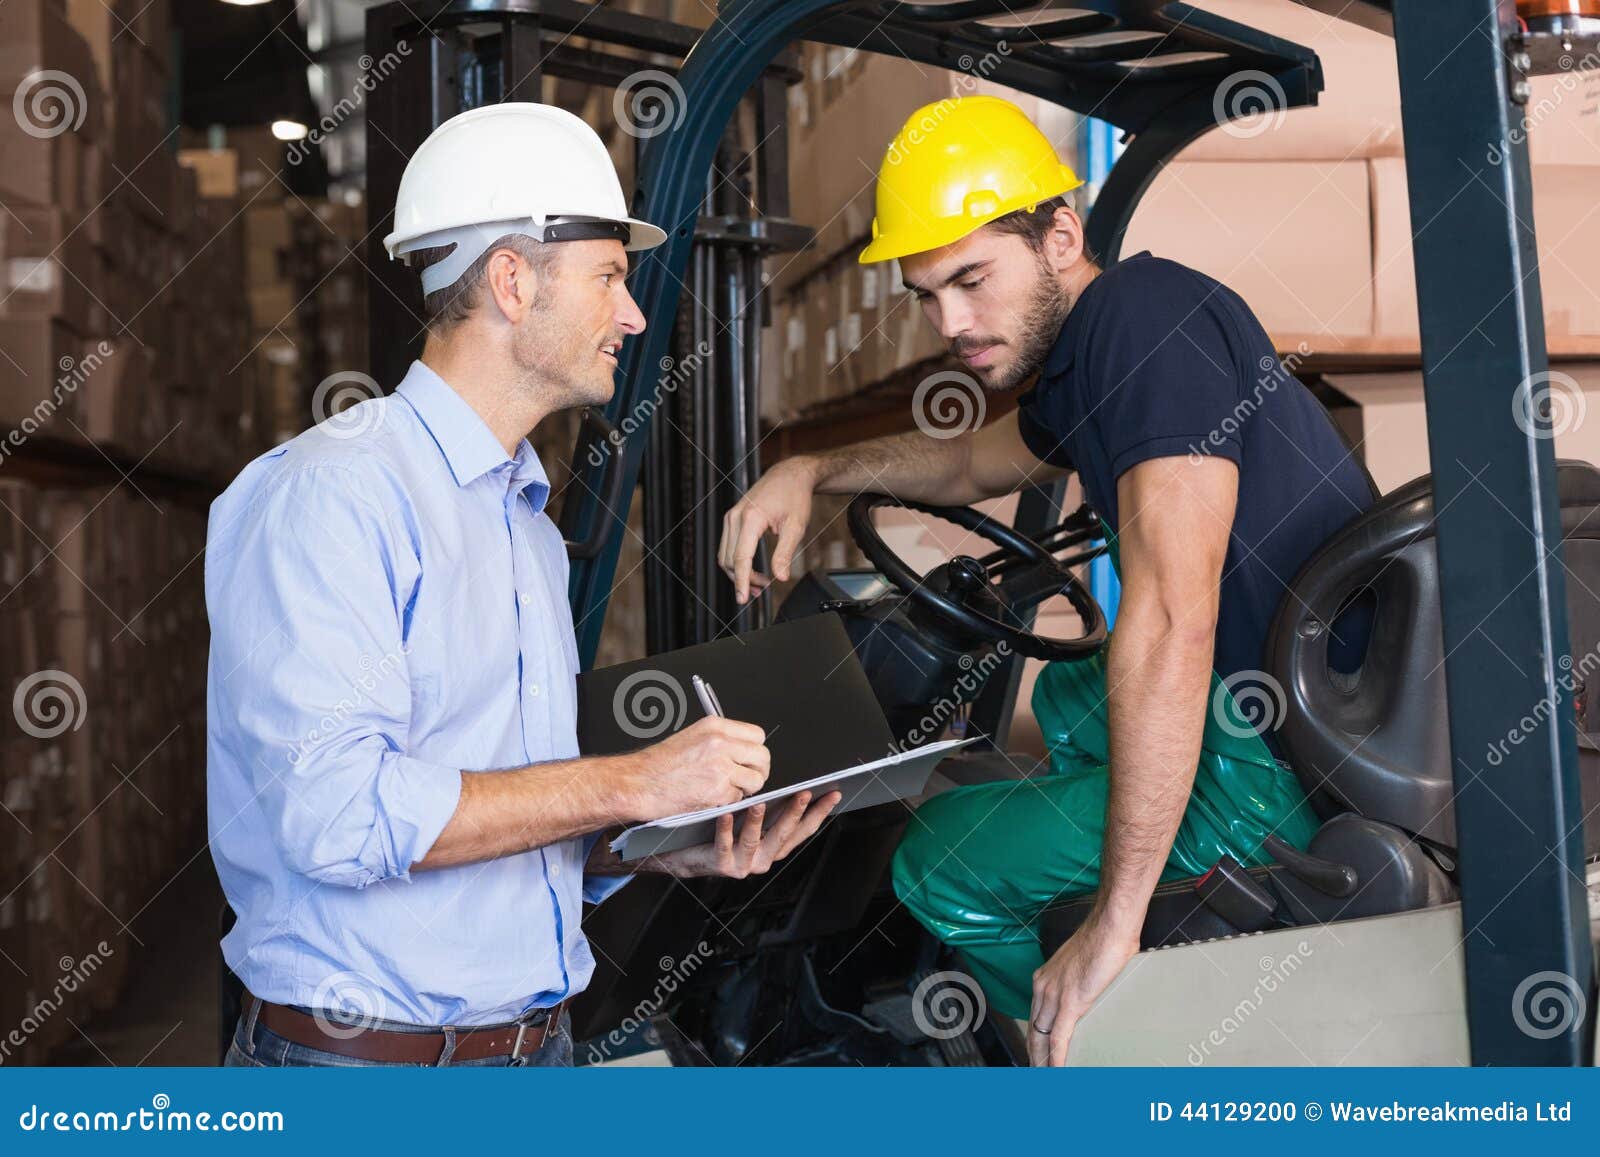 warehouse manager talking with forklift driver